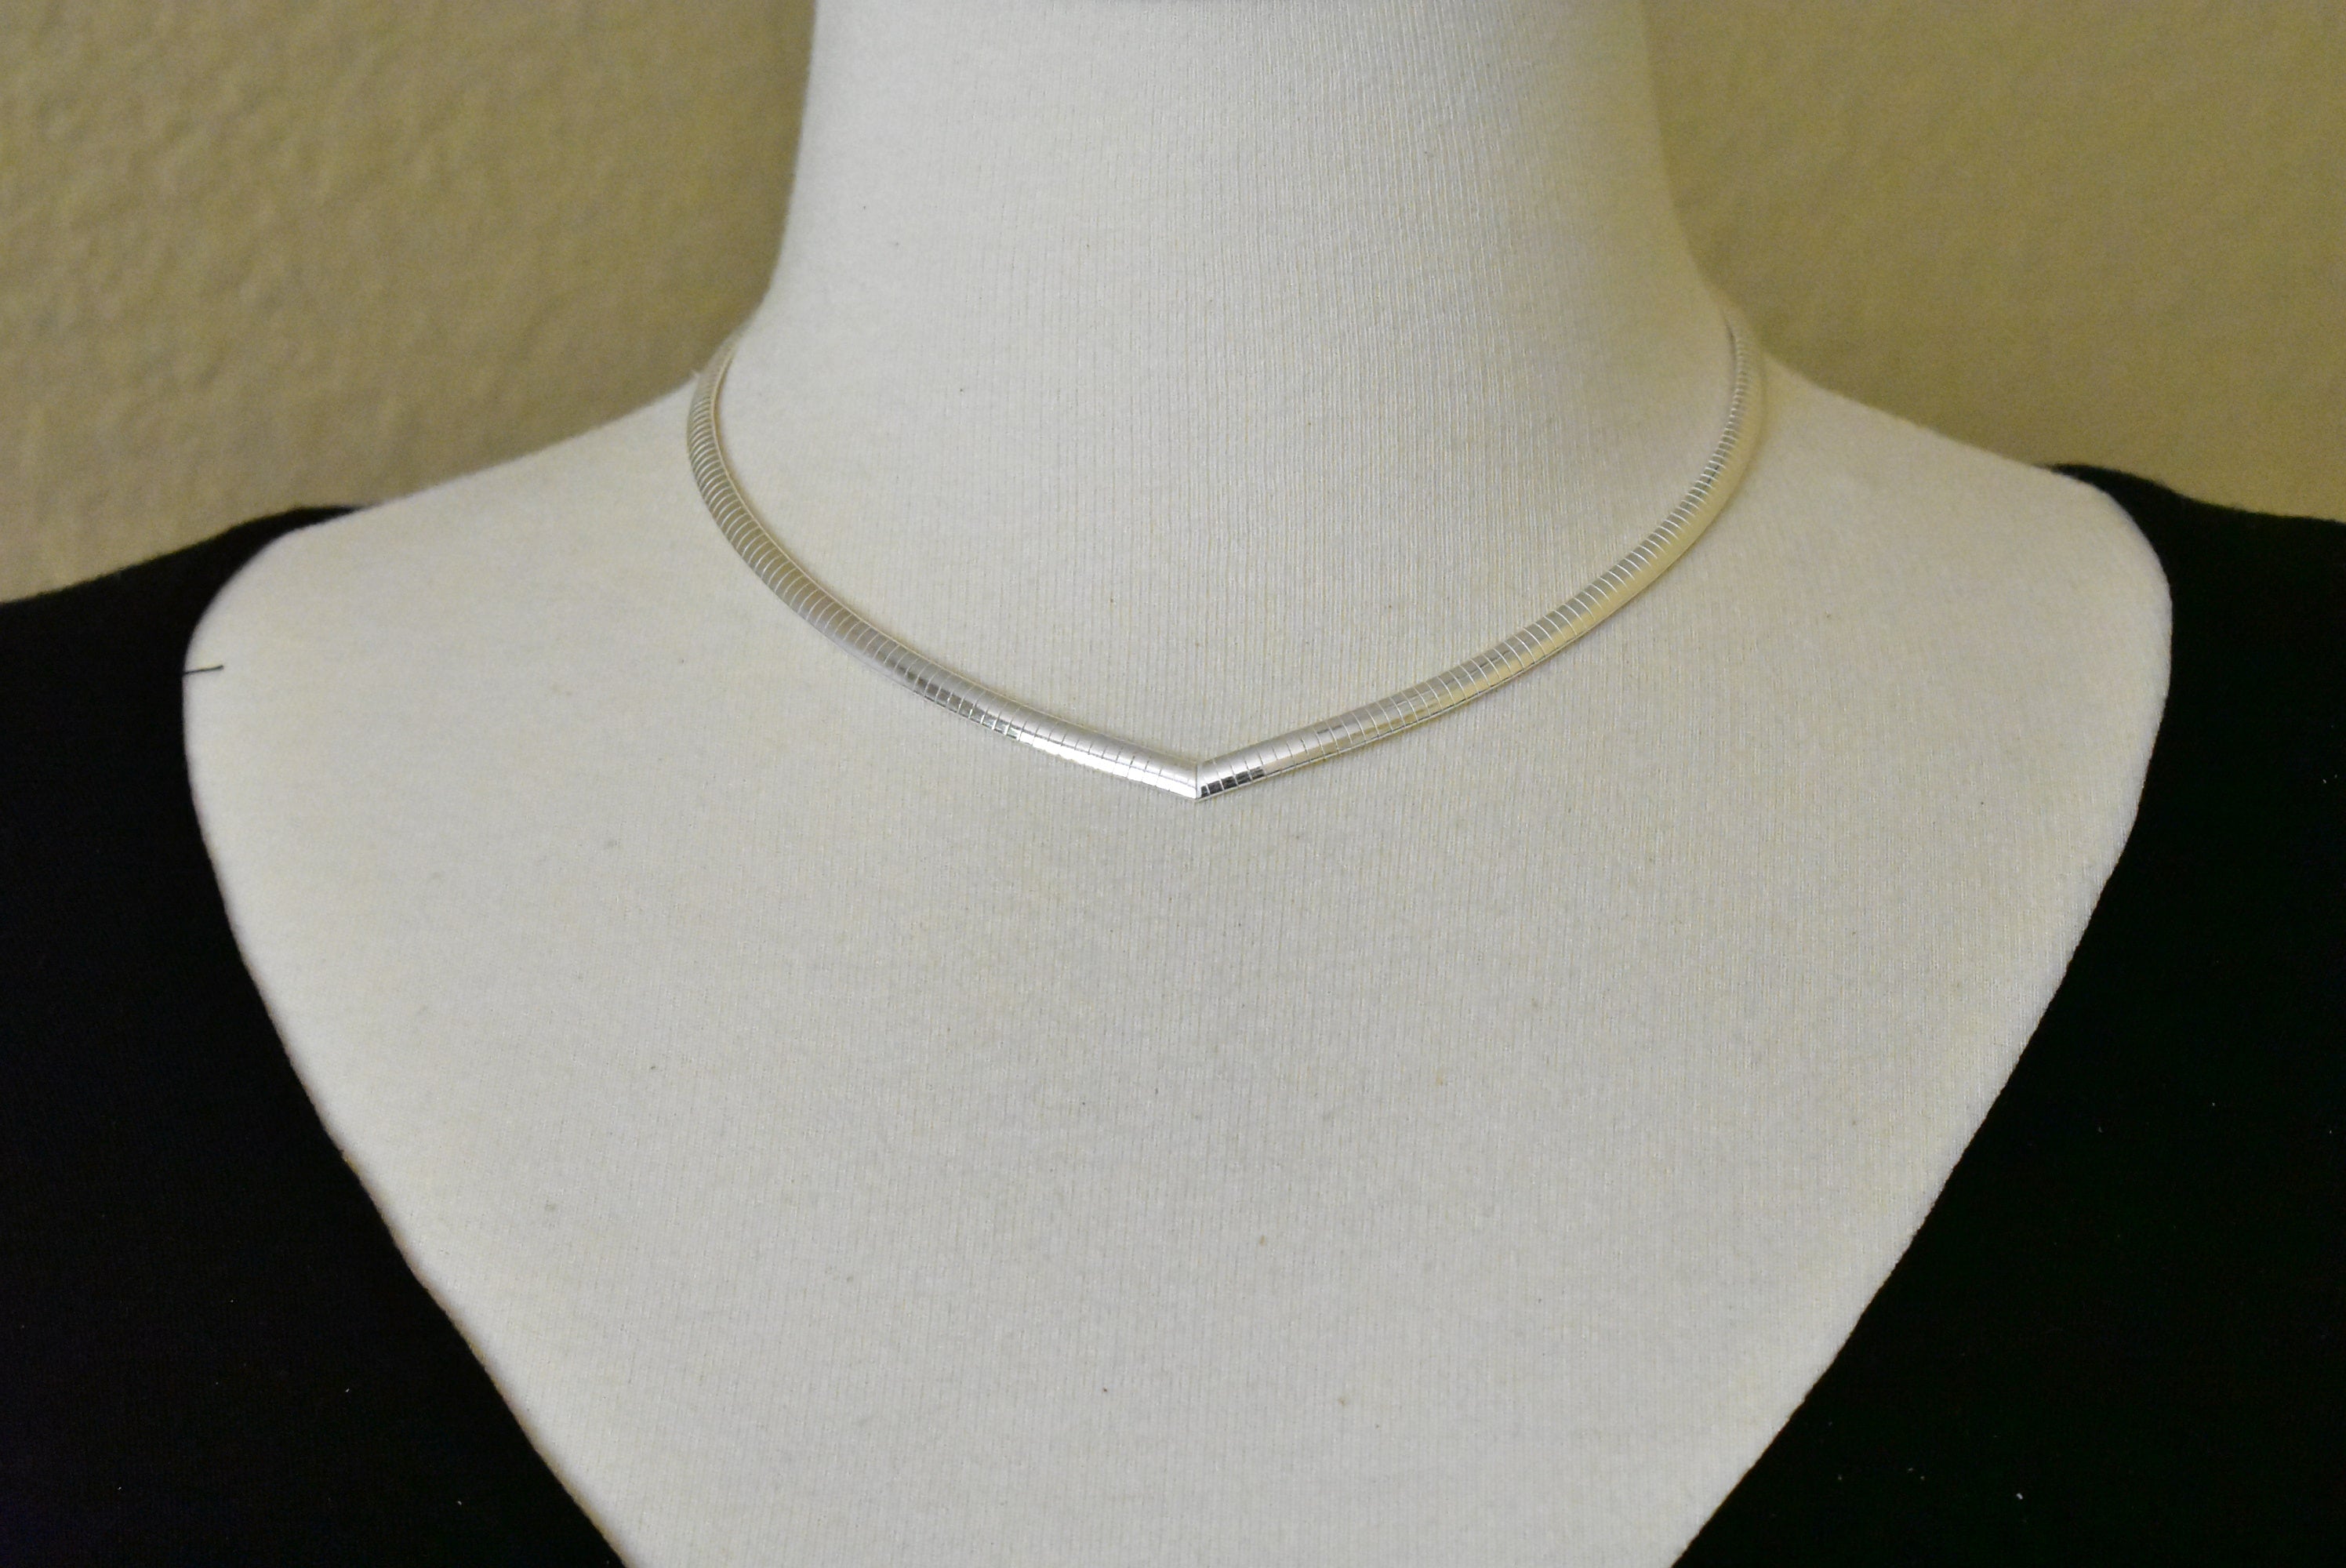 Solid 925 Sterling Silver 4mm Cubetto V-shaped Necklace Chain